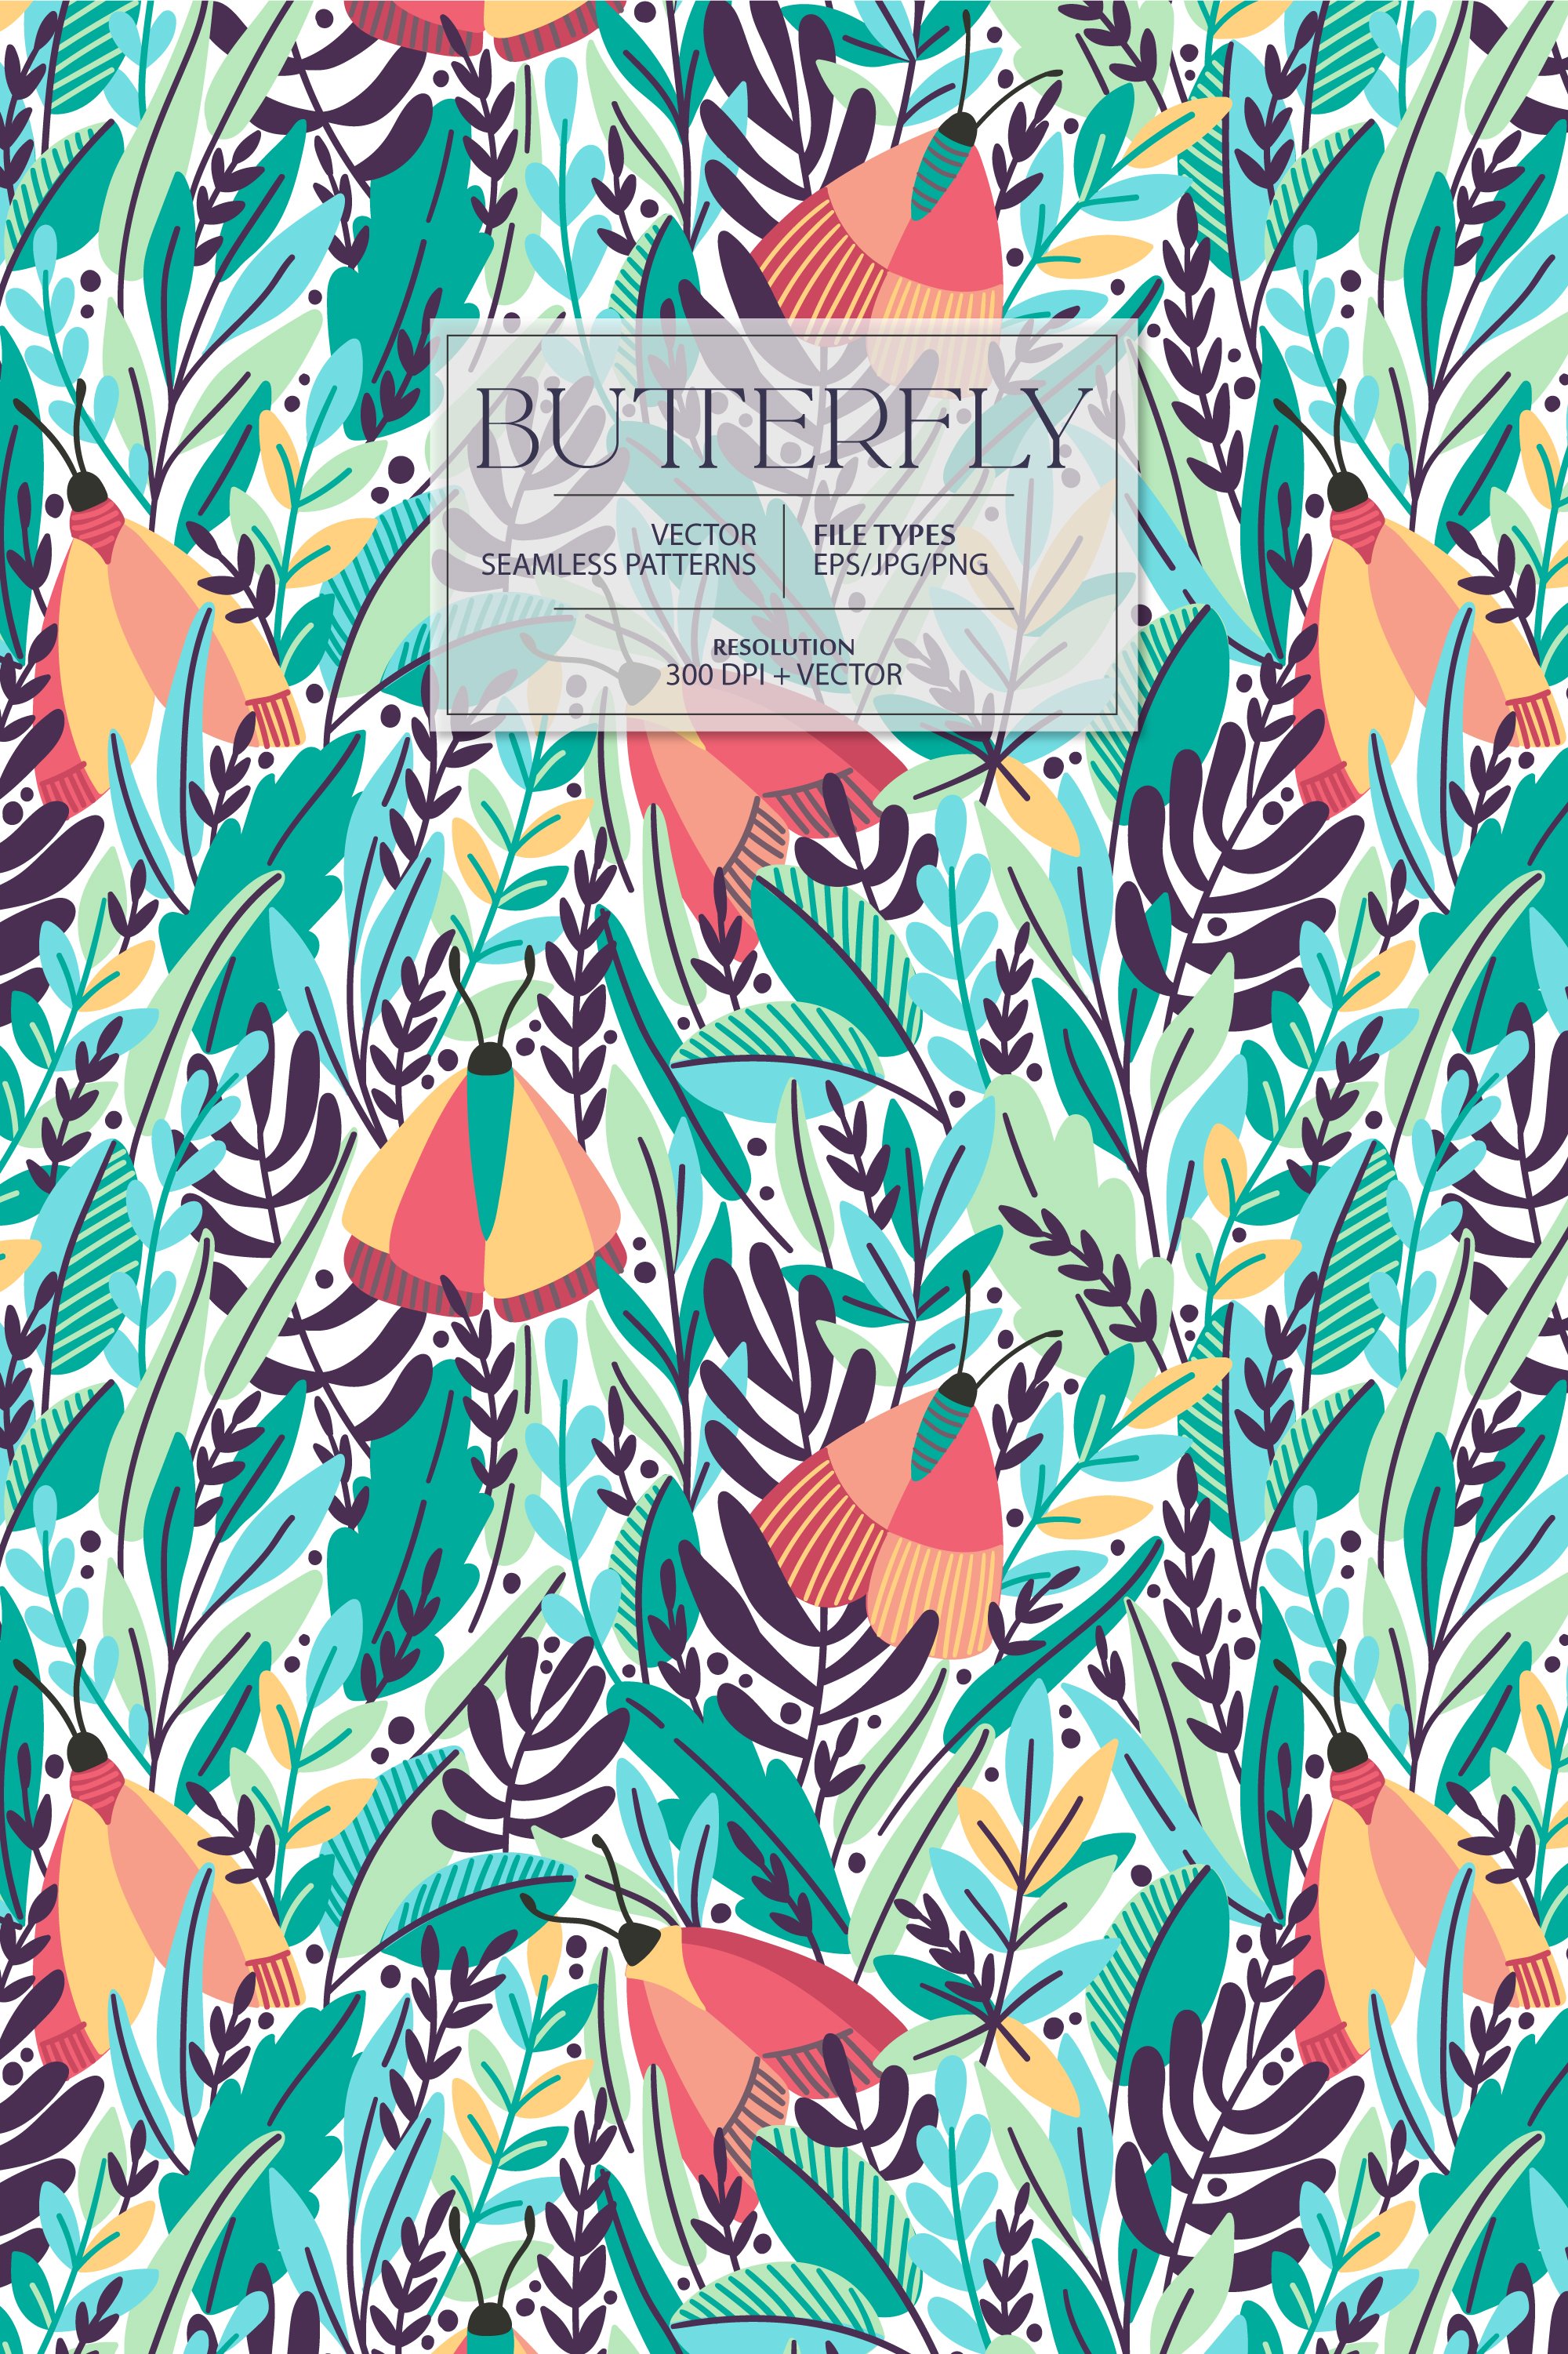 BUTTERFLIES seamless pattern cover image.